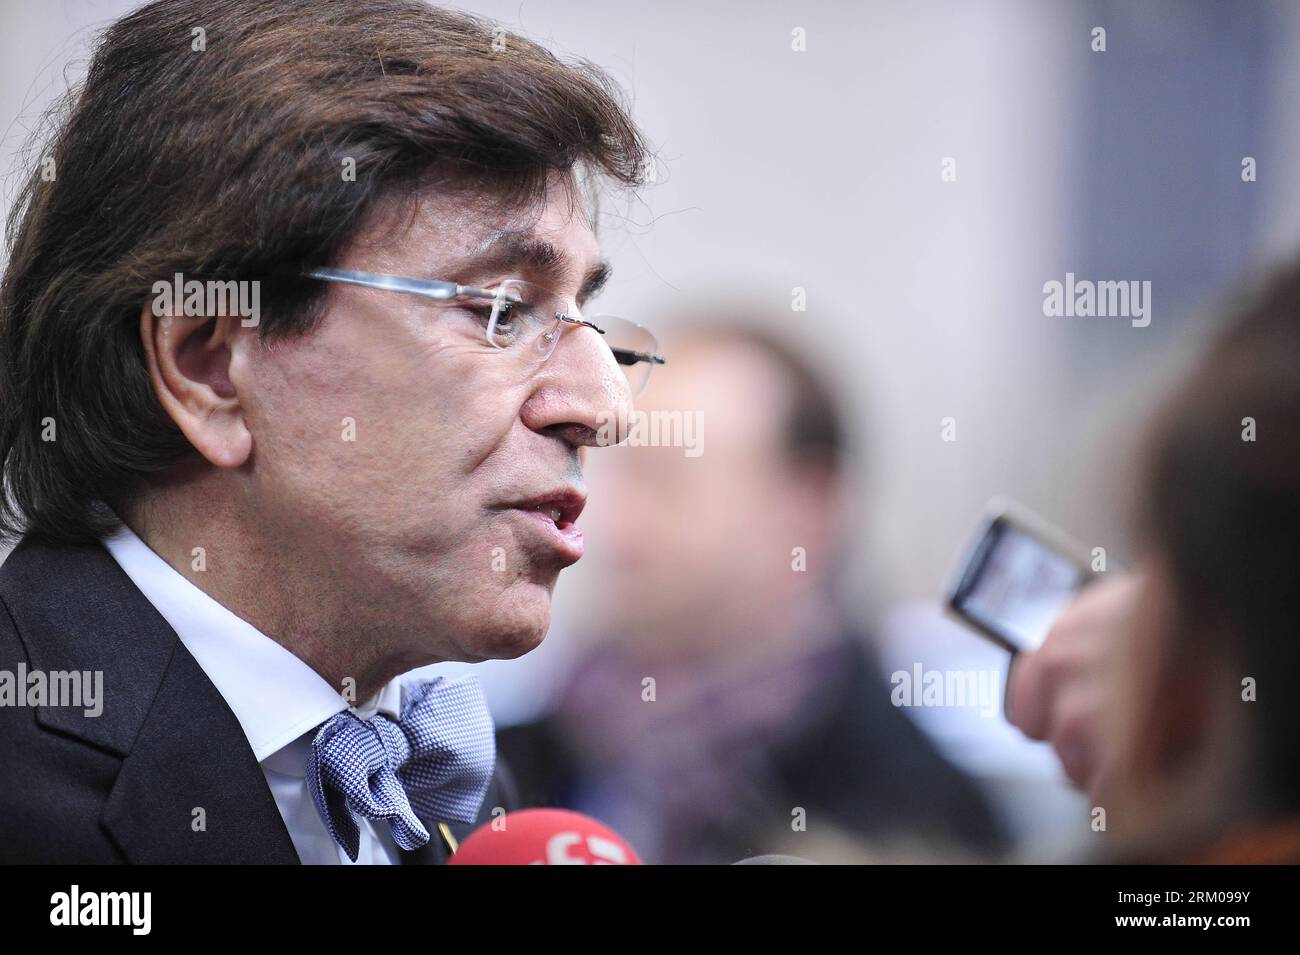 Bildnummer: 59354902  Datum: 14.03.2013  Copyright: imago/Xinhua (130314) -- BRUSSELS, March. 14, 2013 (Xinhua) -- Belgian Prime Minister Elio Di Rupo arrives at EU headquarters for an EU summit in Brussels, capital of Belgium, March 14, 2013. European Union (EU) leaders gathered in Brussels Thursday for a two-day spring summit in an attempt to strike a difficult balance between growth and austerity as the sovereign debt crisis across Europe is finally easing. (Xinhua/Ye Pingfan)(yt) BELGIUM-EU-SUMMIT PUBLICATIONxNOTxINxCHN Politik people Gipfel Gipfeltreffen Porträt premiumd x0x xac 2013 quer Stock Photo